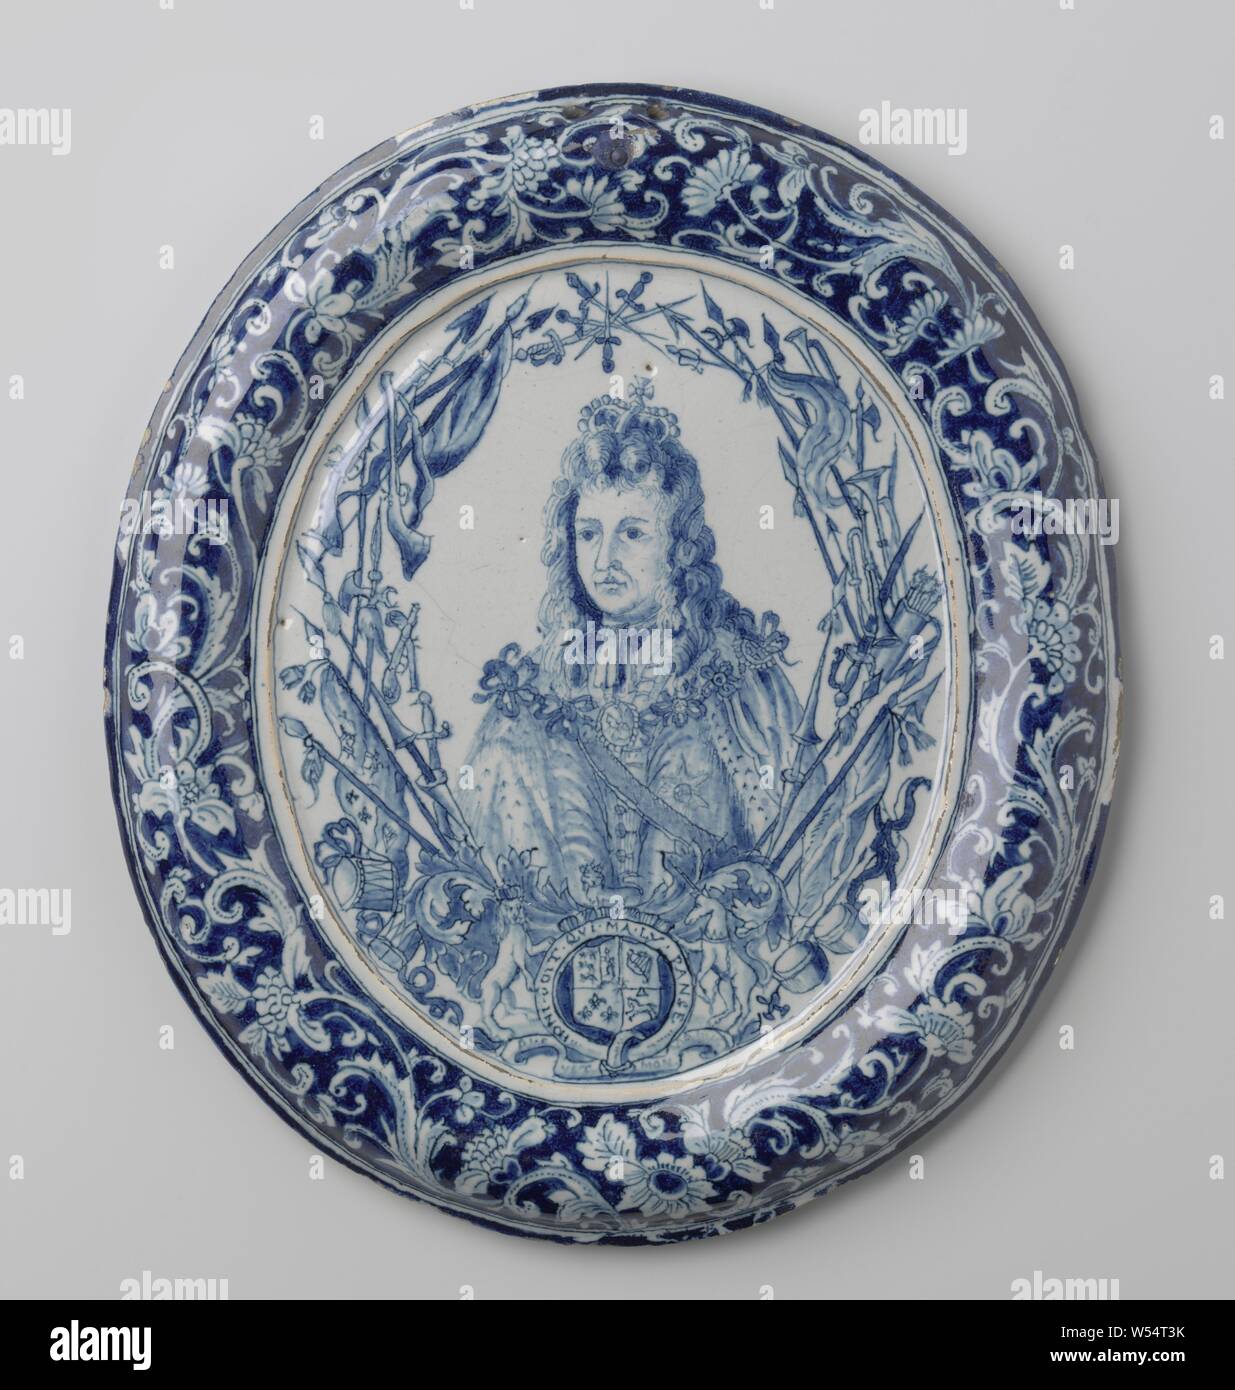 George I, King of England, Plaque of Faience. Painted blue with the portrait of George I, King of England (1714-1728). Possibly a fake after Dutch or English example. The object is (probably) a DECREASE, England, George I (King of Great Britain and Ireland), anonymous, Netherlands (possibly), 1720 - 1740 and/or 1830 - 1880, h 23.5 cm Stock Photo